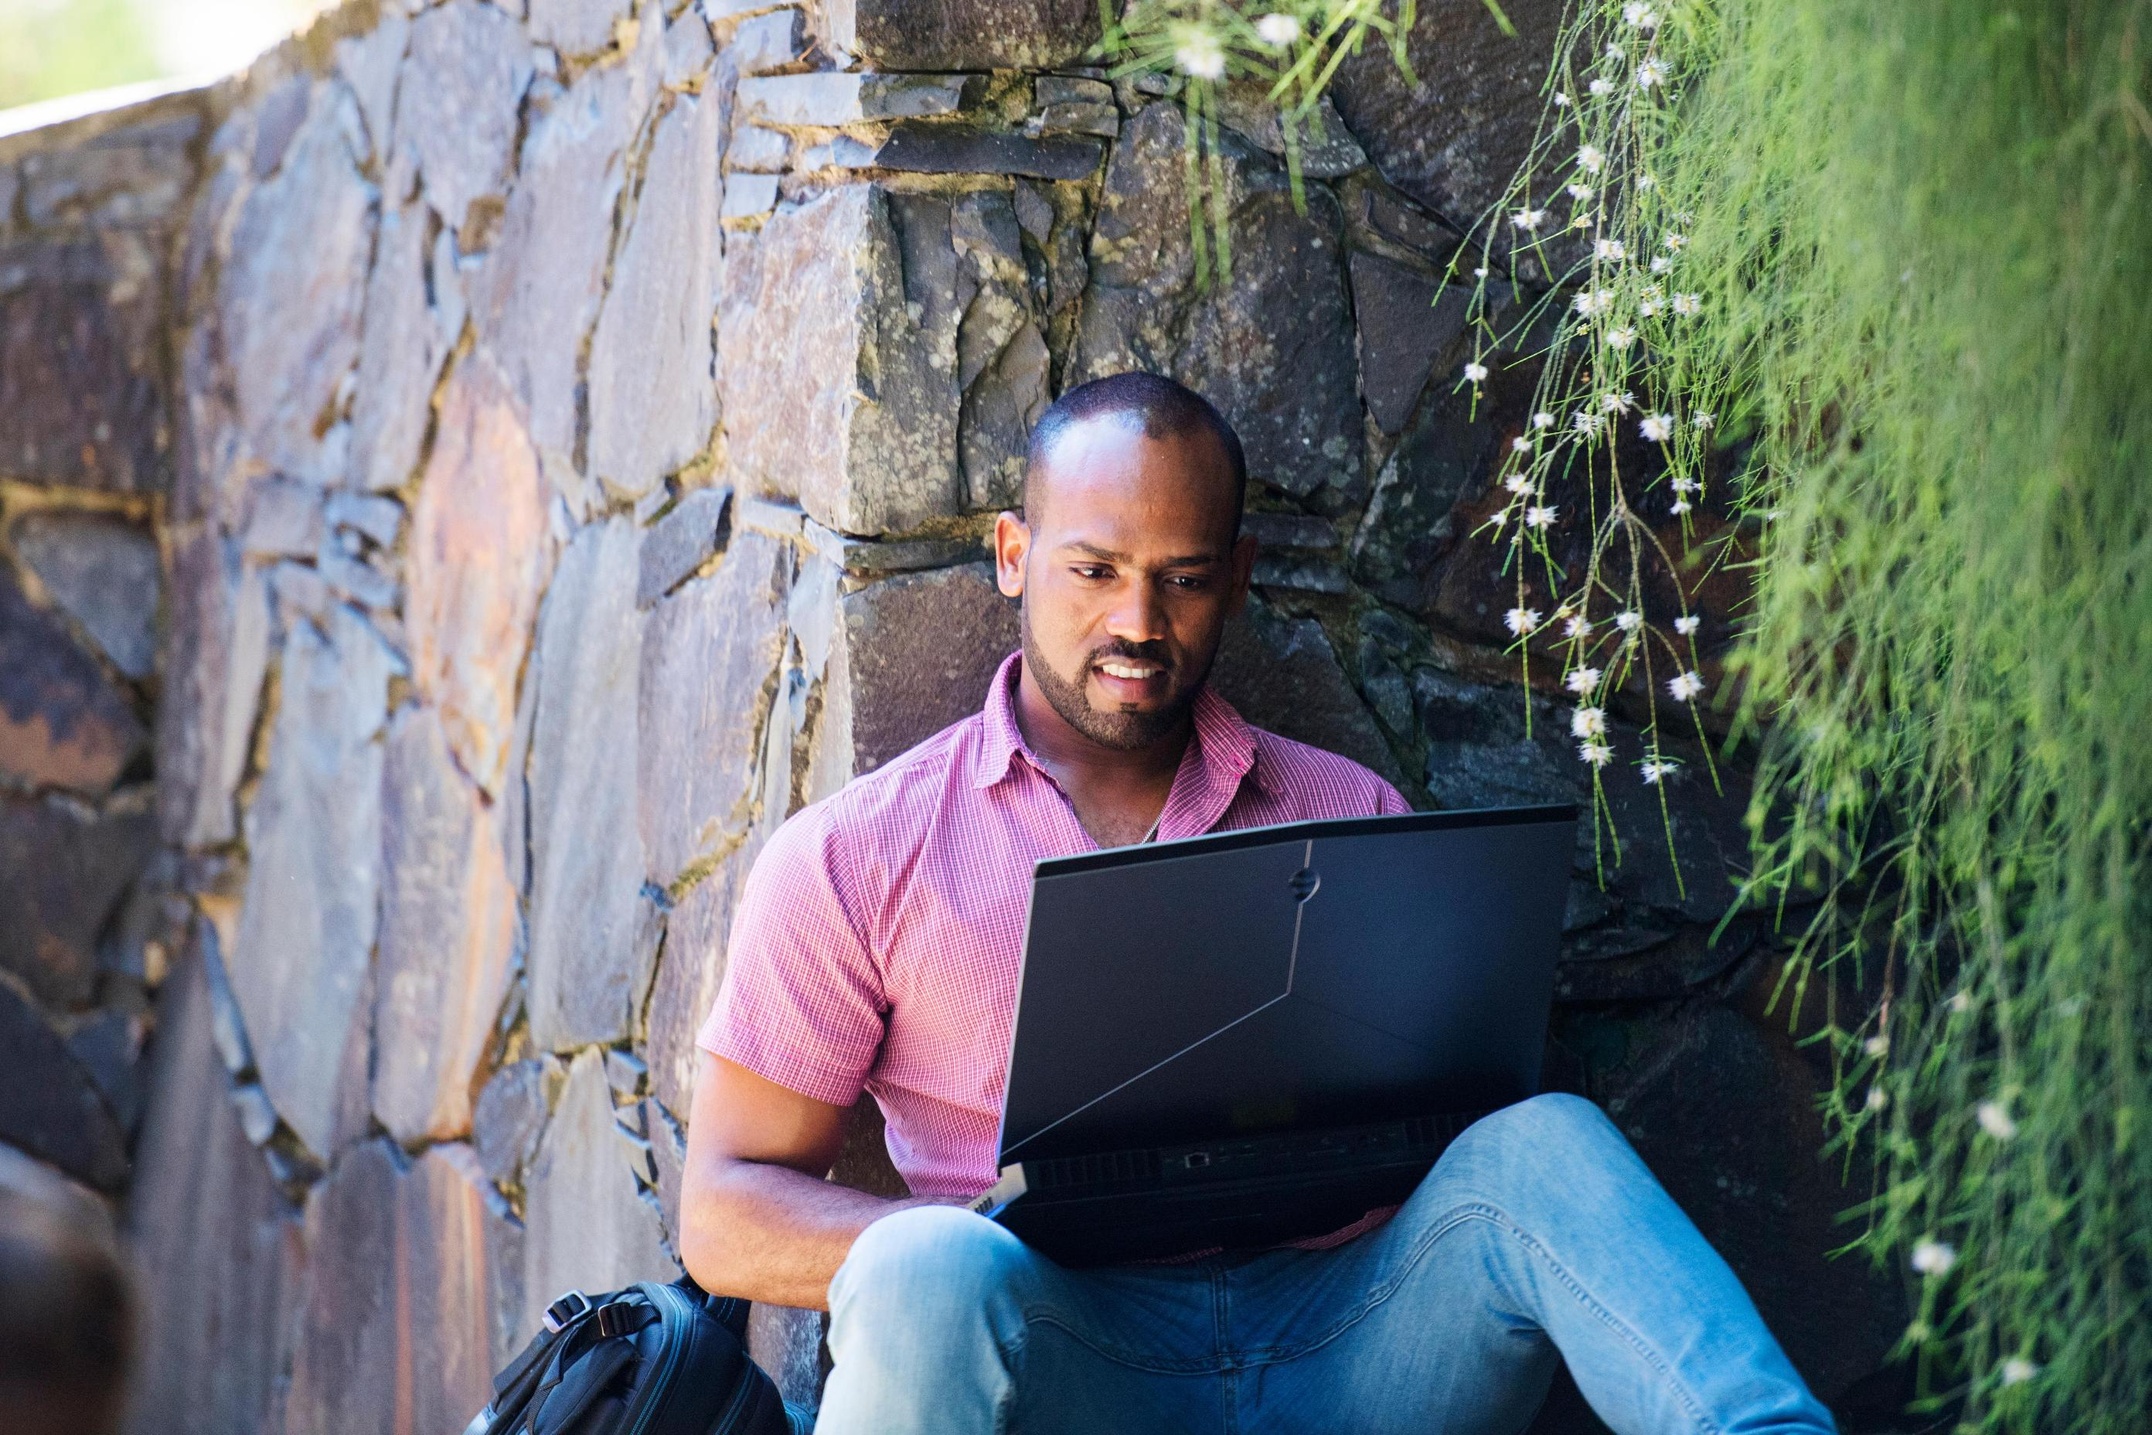 Student in garden with laptop